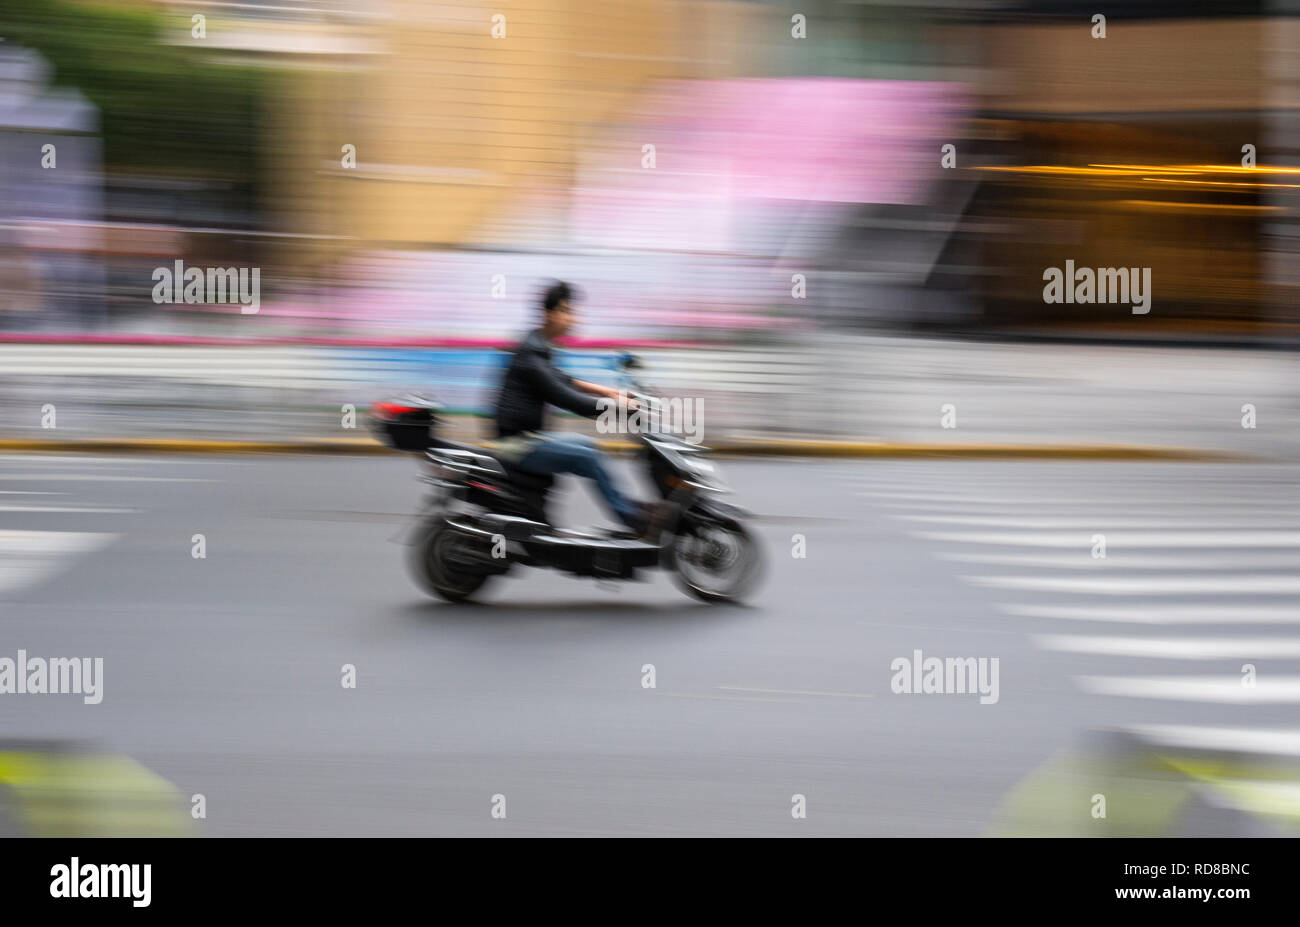 Man riding a scooter in Shanghai, China Stock Photo